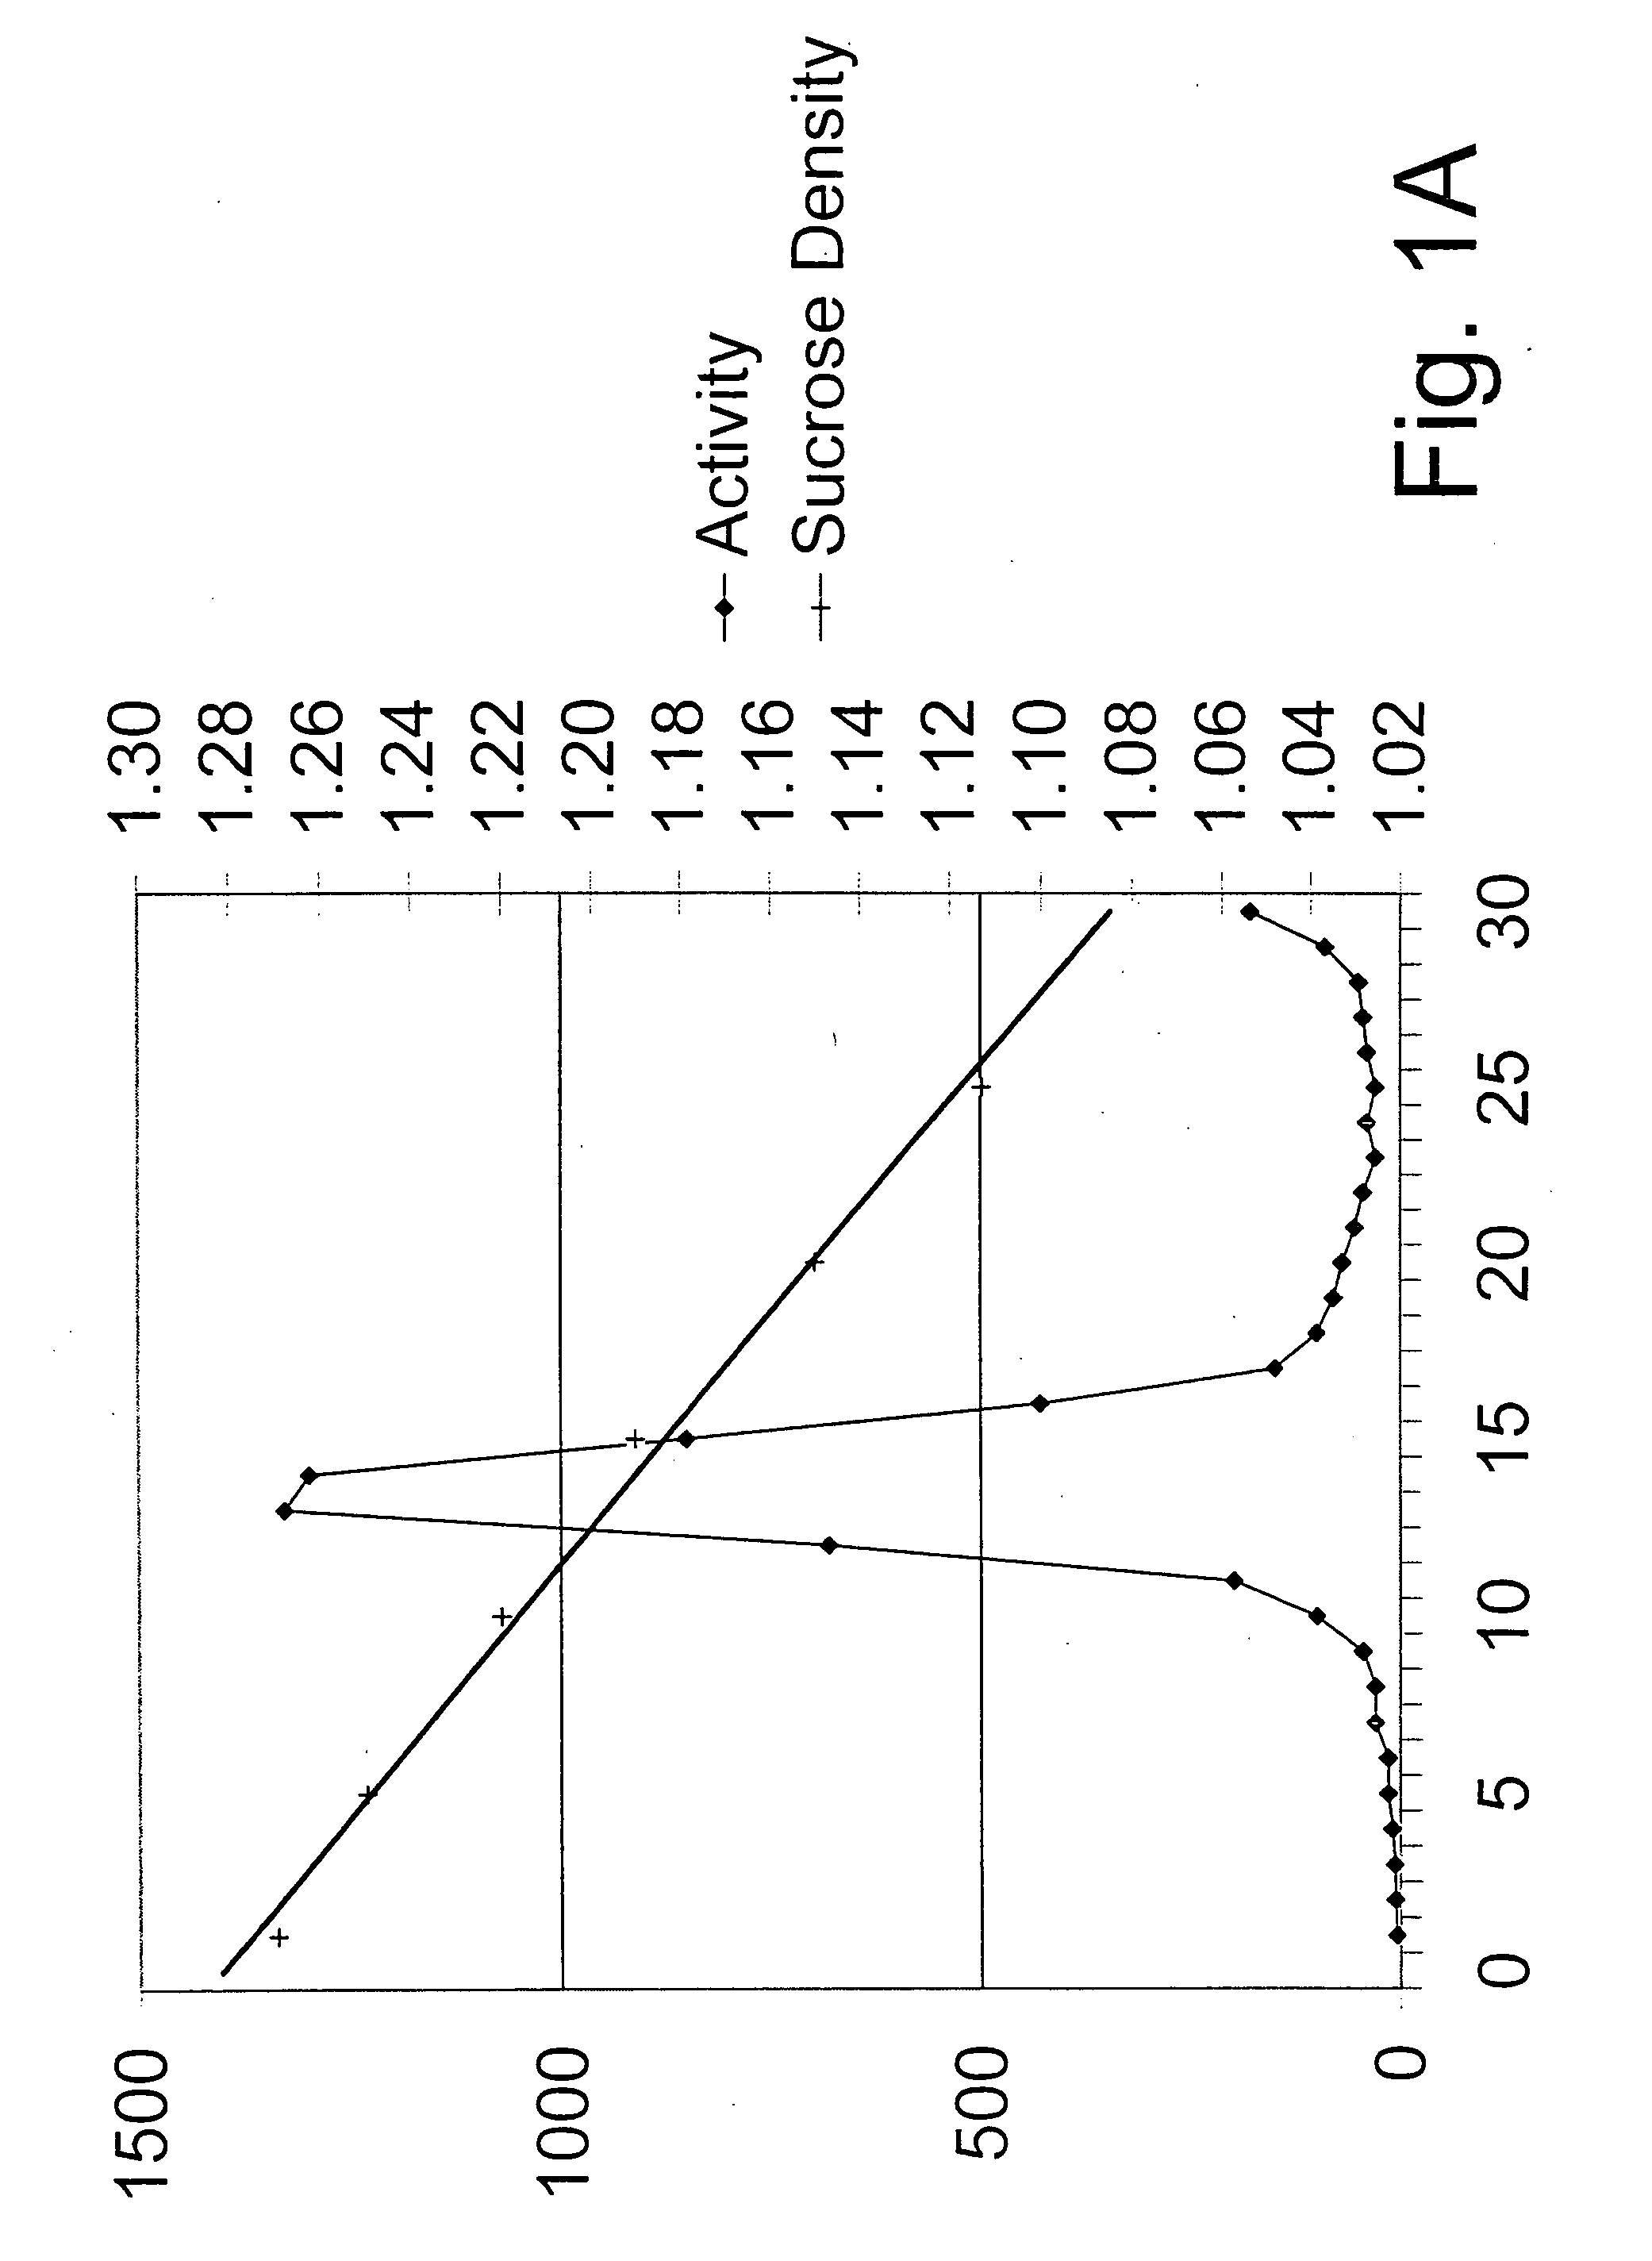 Combined treatments and methods for treatment of mycoplasma and mycoplasma-like organism infections